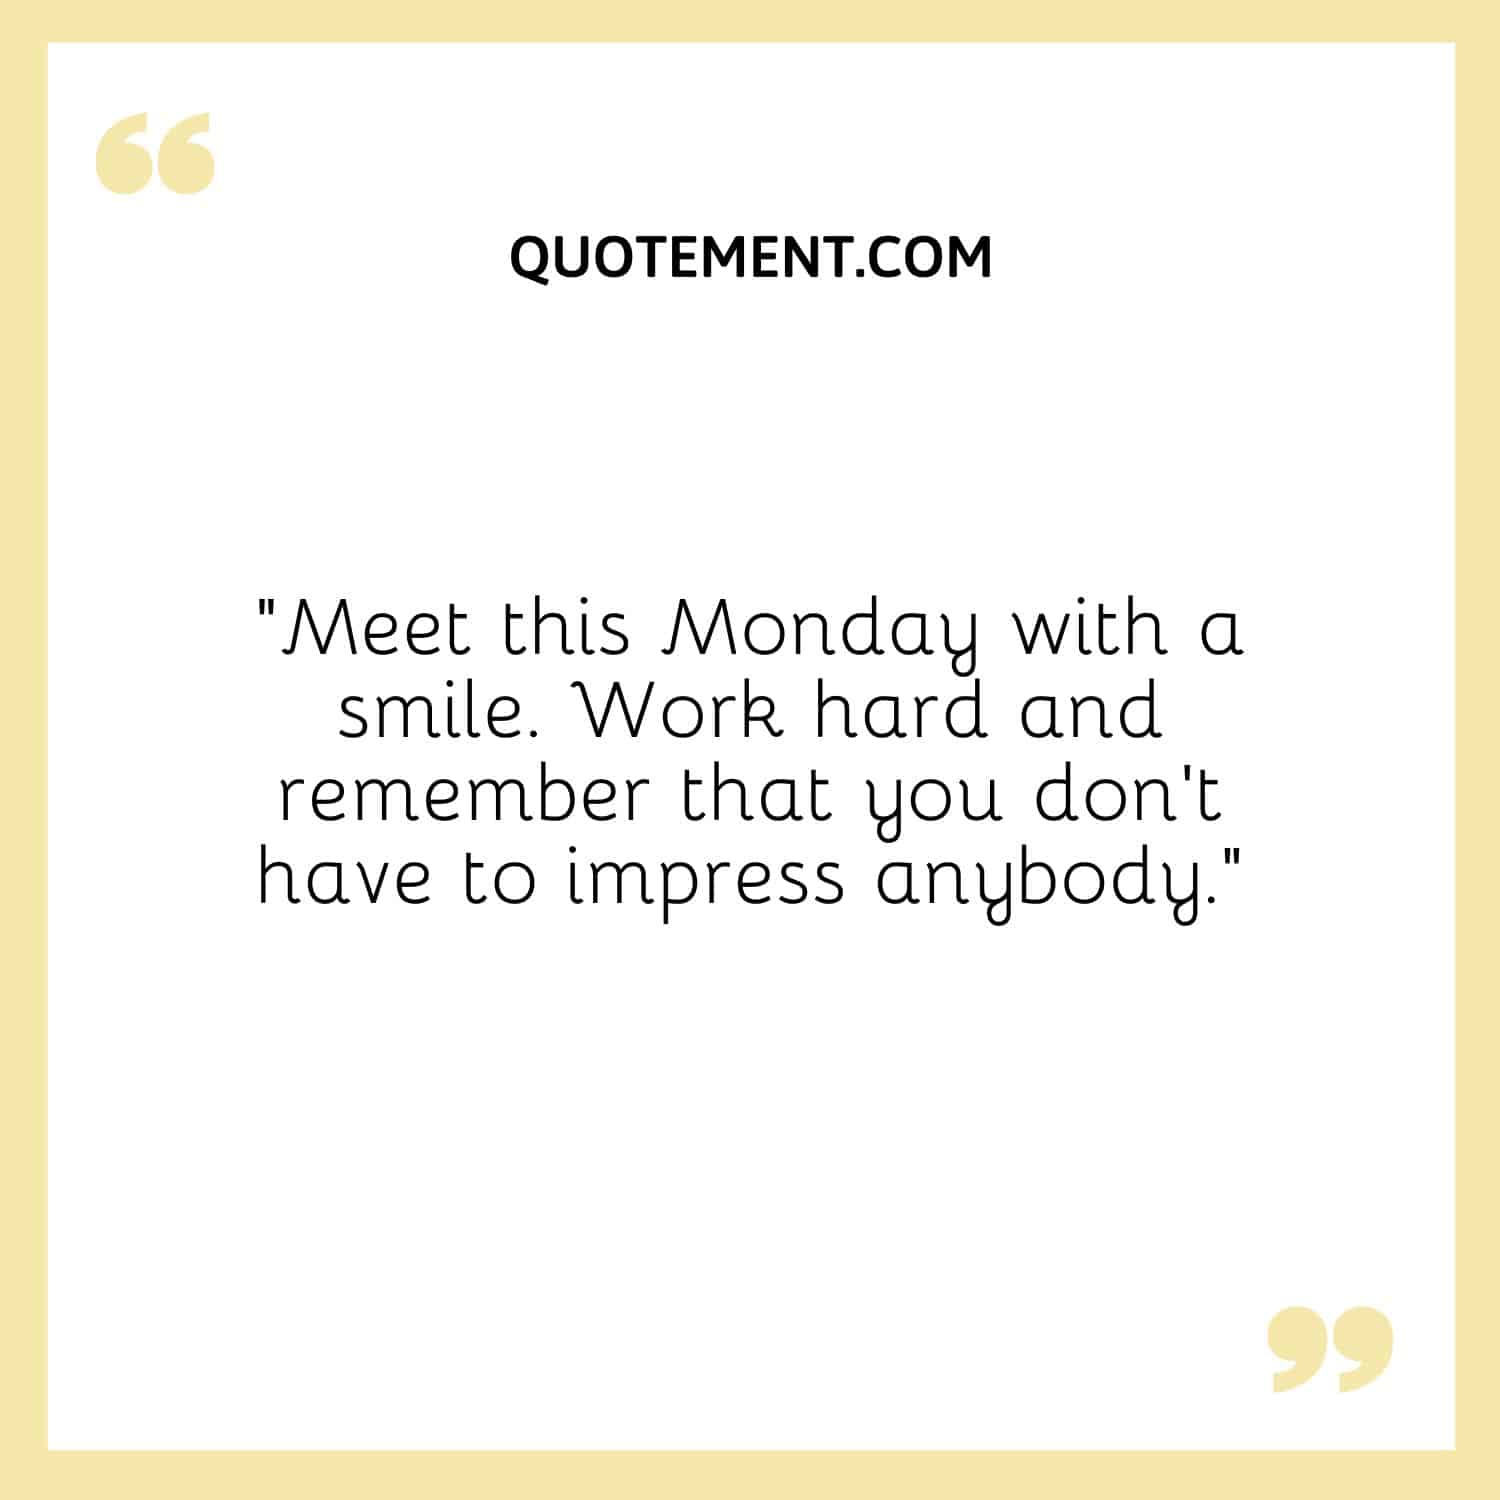 Meet this Monday with a smile